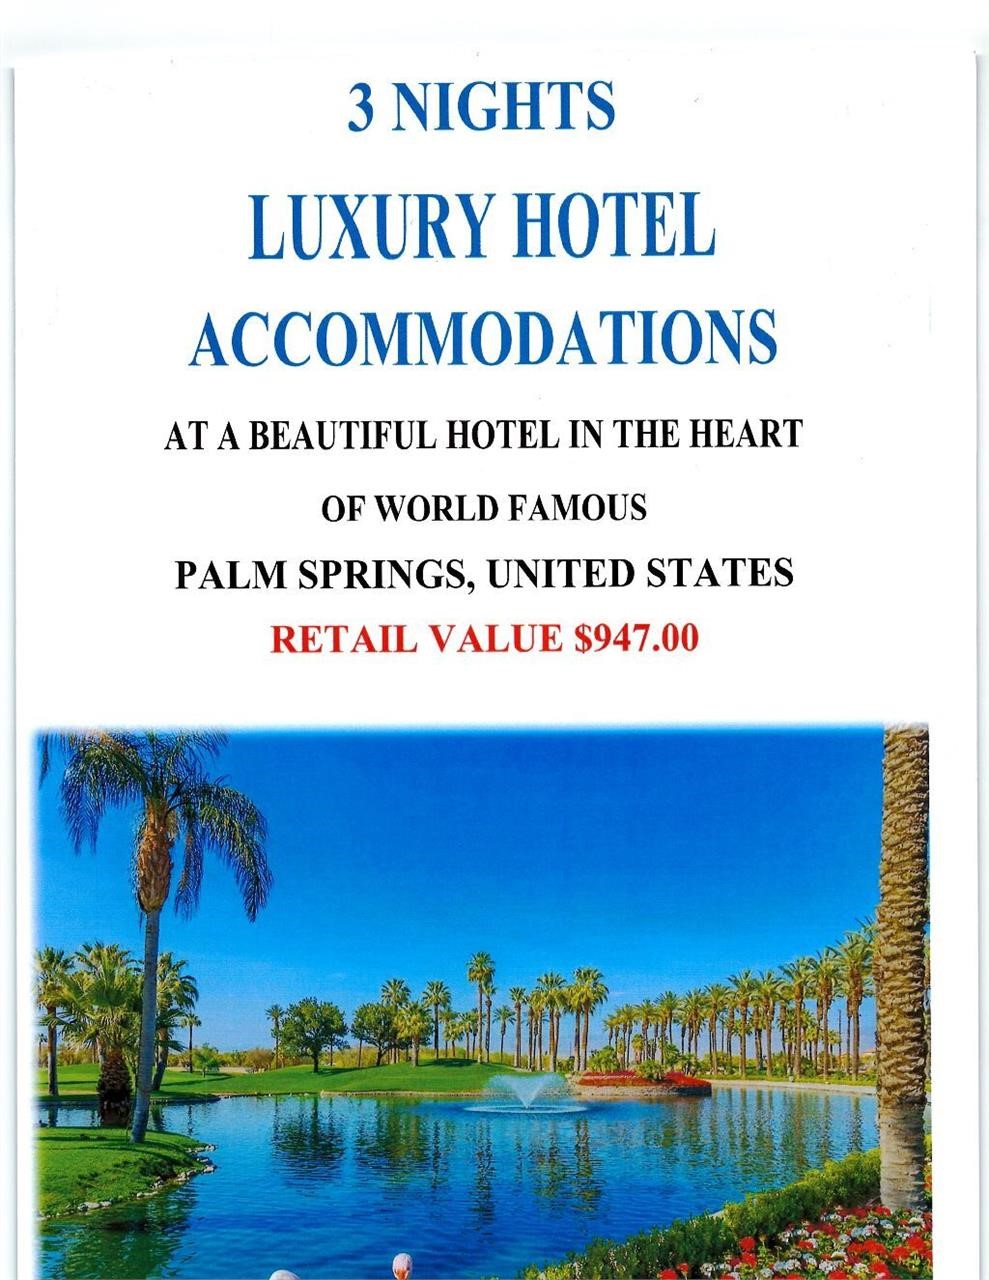 MAY 12TH. Vacation Hotel Accommodation Packages Auction